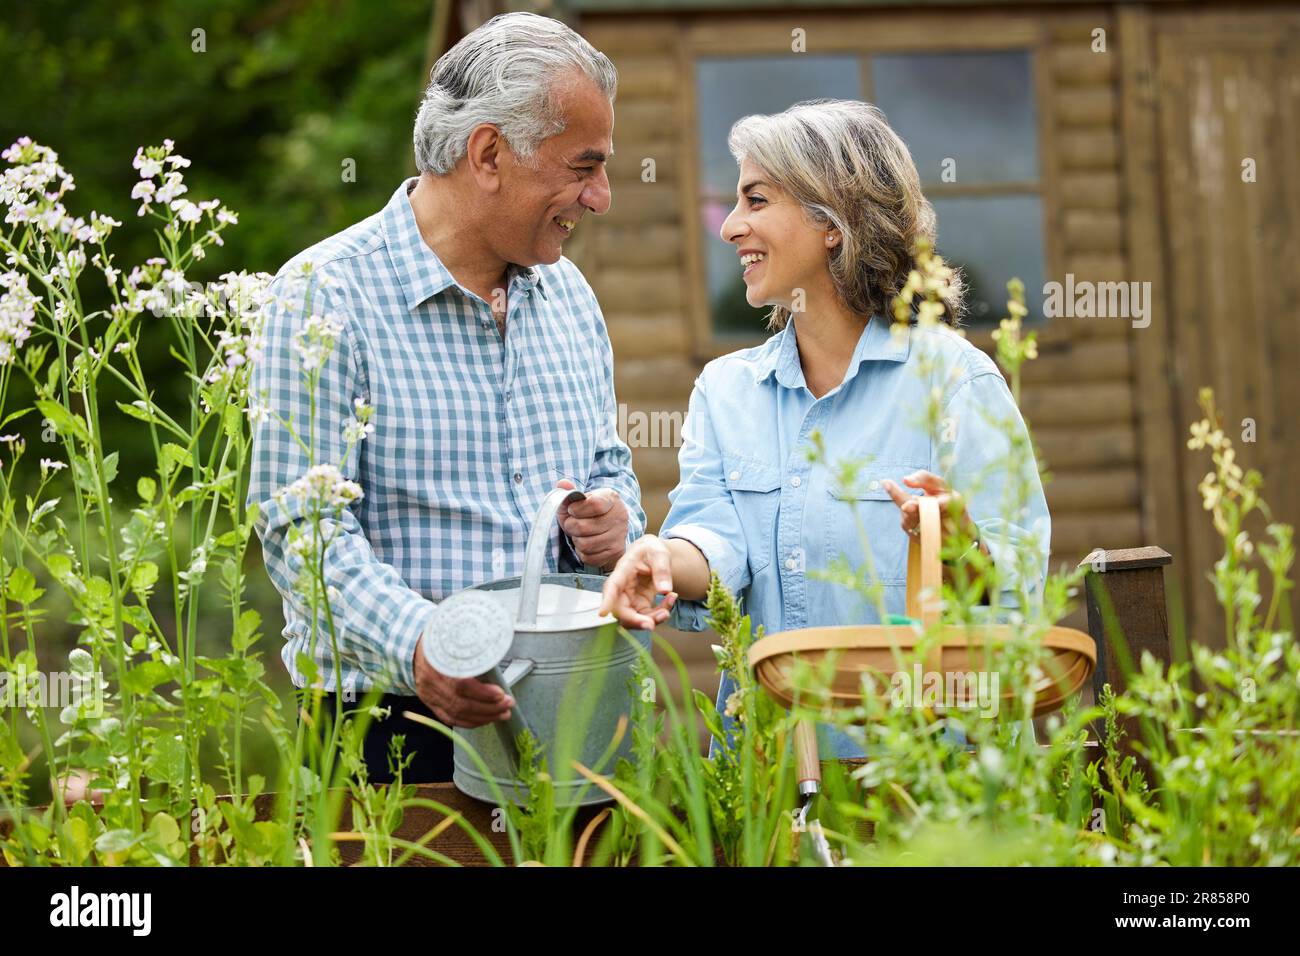 Senior Couple In Garden At Home Working On Raised Vegetable Beds Together Stock Photo